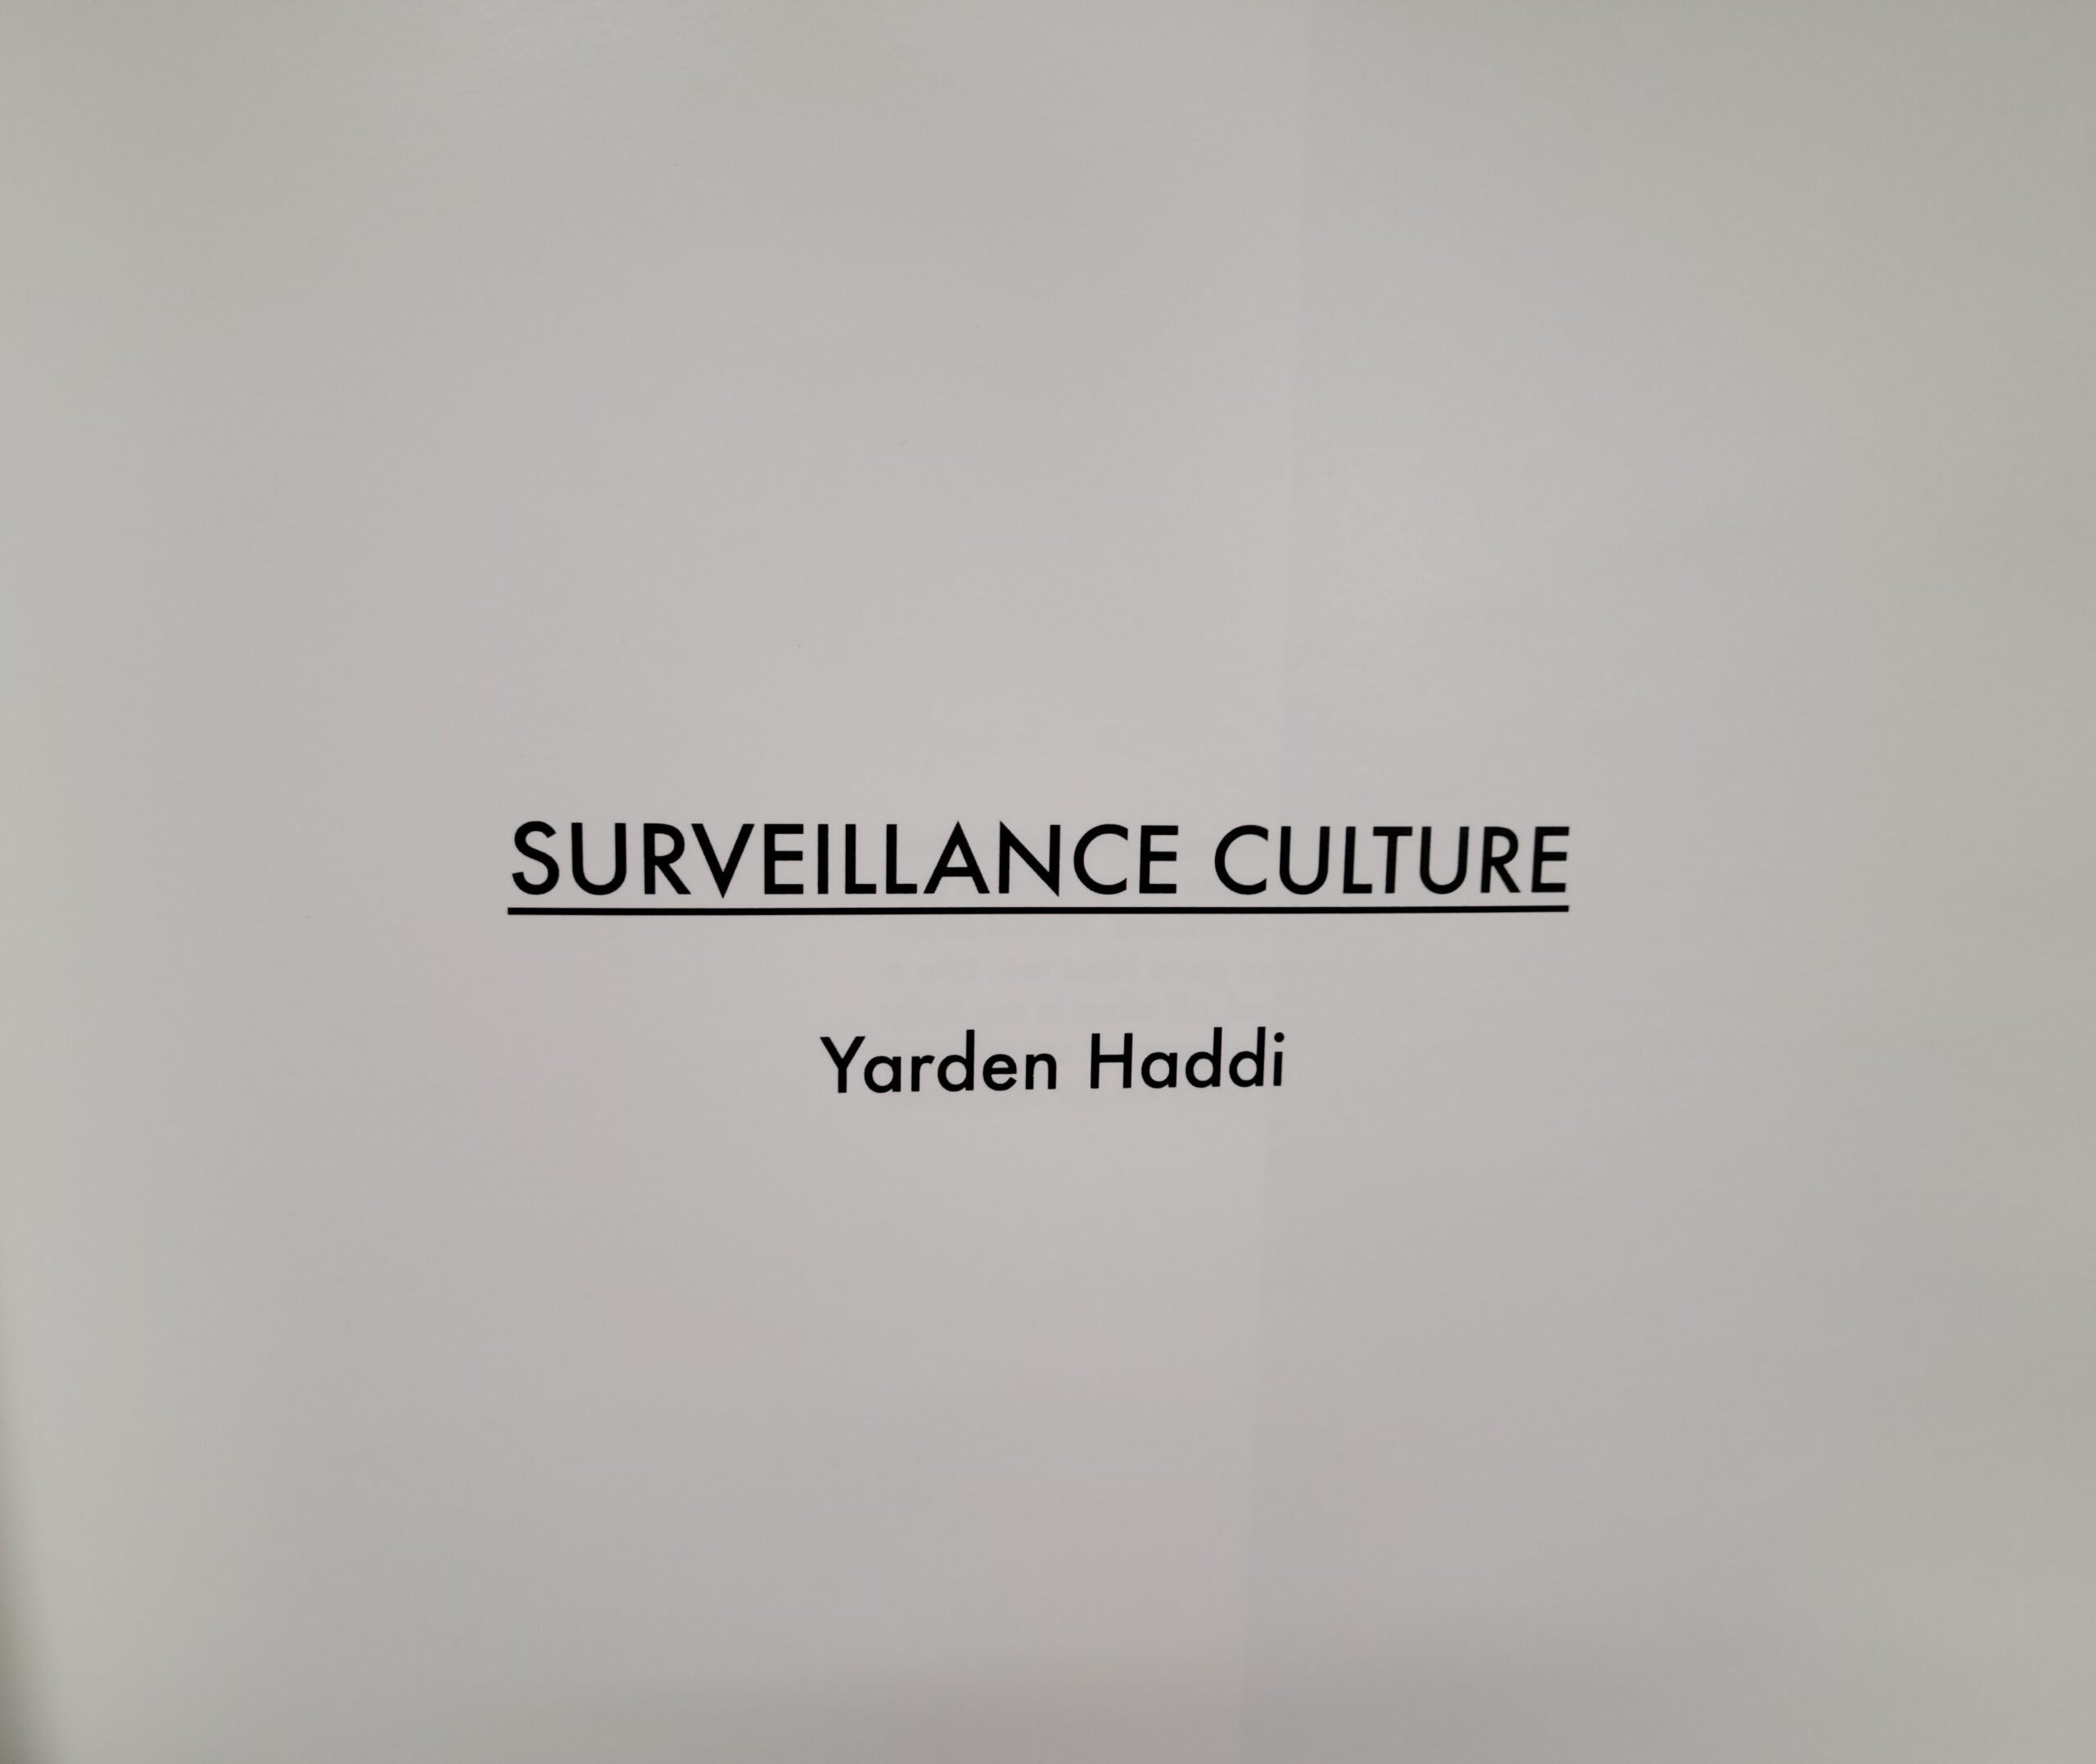 Frpnt page from book Surveillance Culture by Yarden Haddi